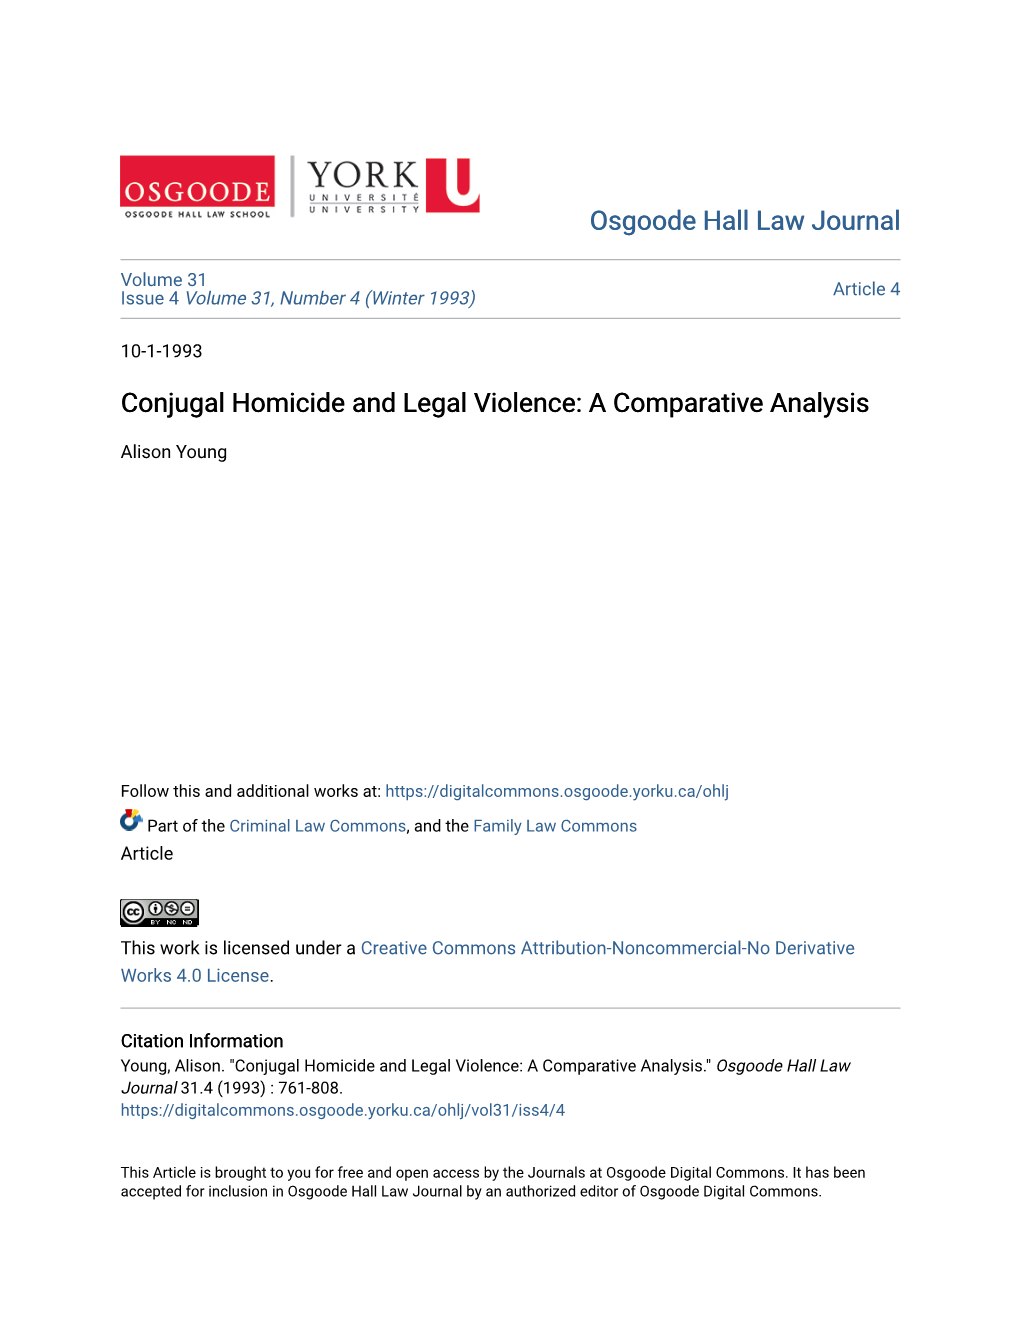 Conjugal Homicide and Legal Violence: a Comparative Analysis